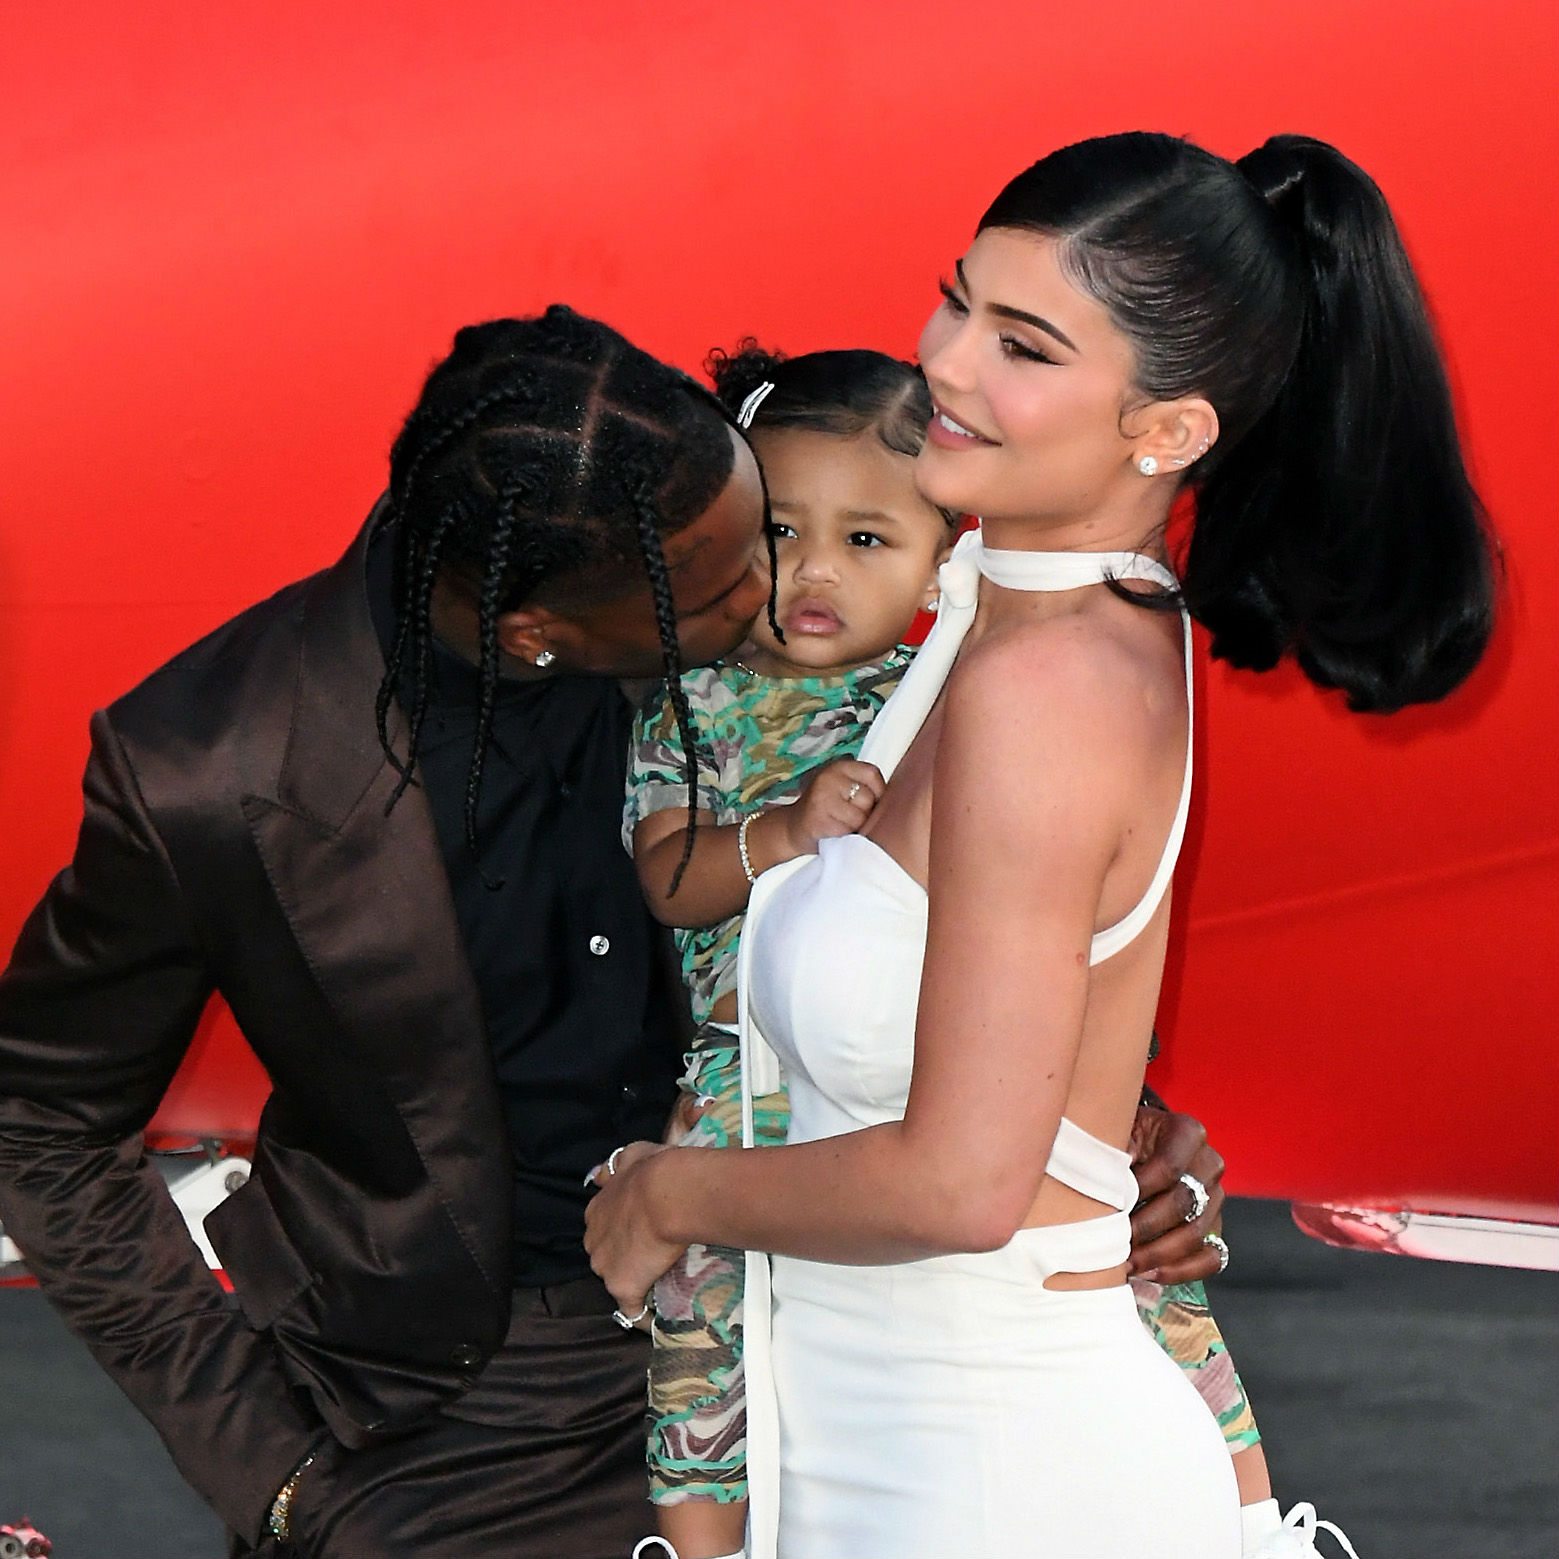 IN PICS: Kylie Jenner's 1-Year-Old Daughter Stormi Webster Makes Her Red Carpet Debut